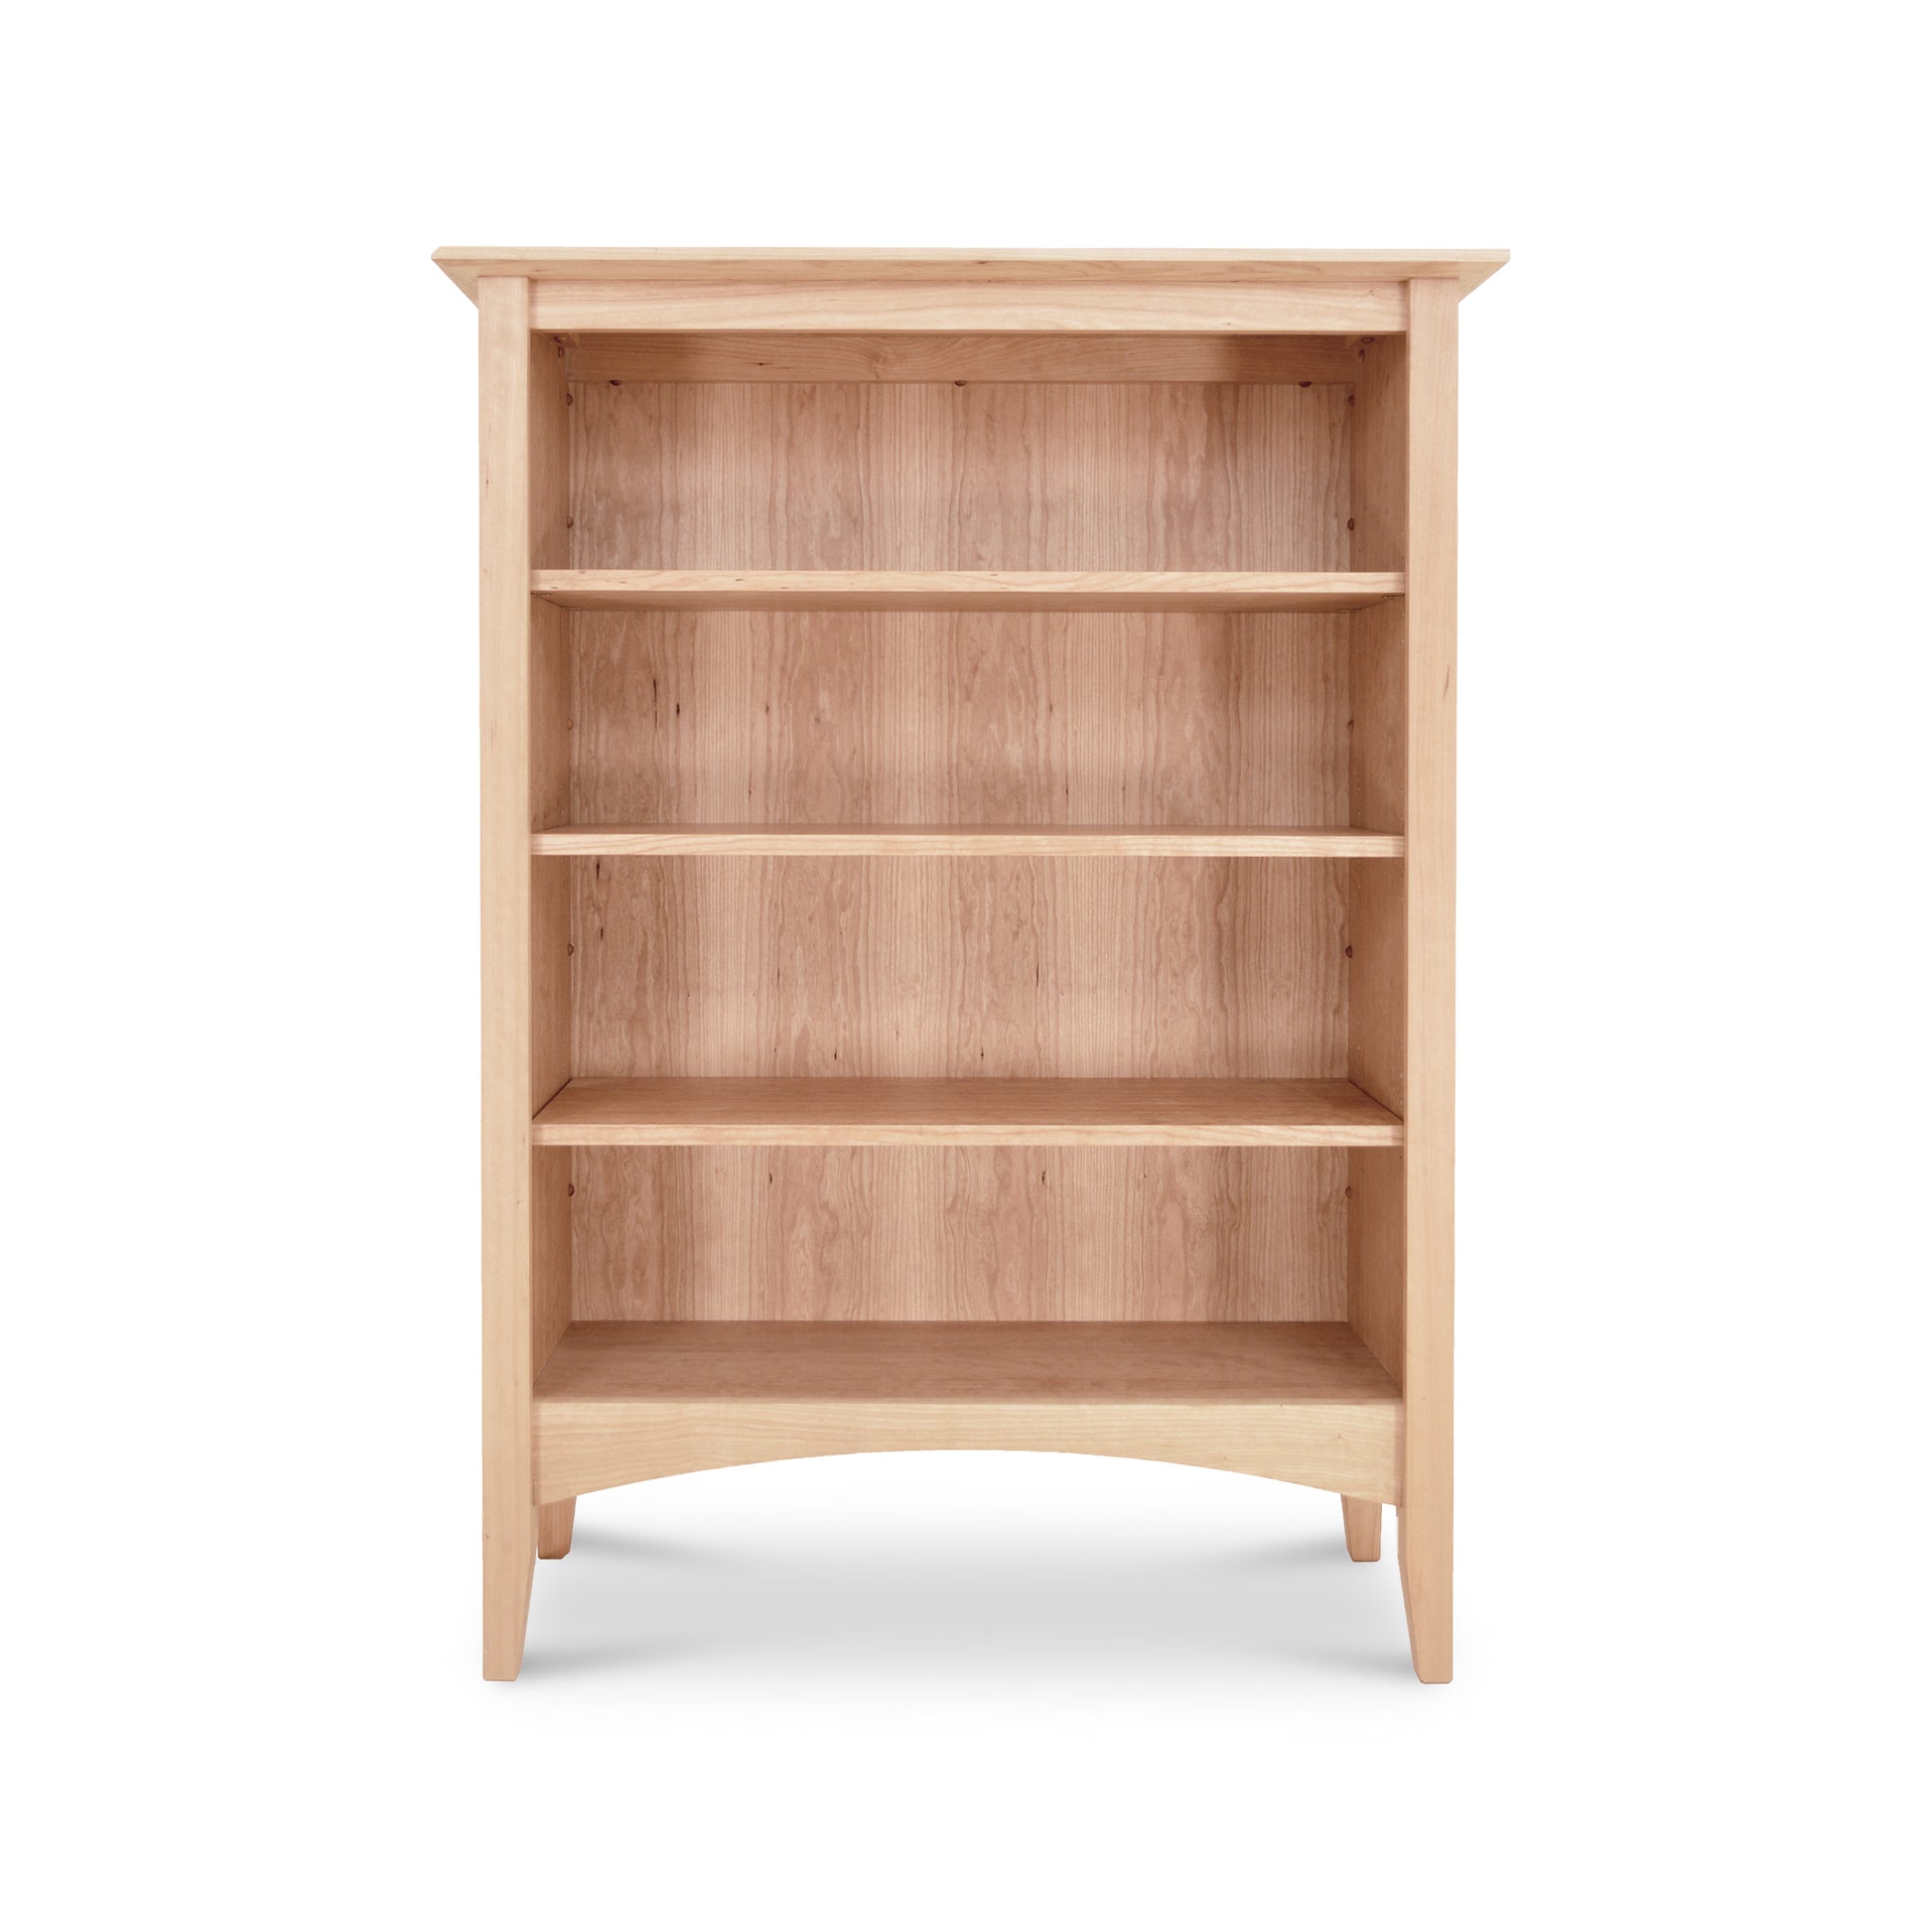 An Maple Corner Woodworks American Shaker bookcase with four shelves, empty and isolated on a white background, crafted from sustainably harvested hardwoods in Vermont.